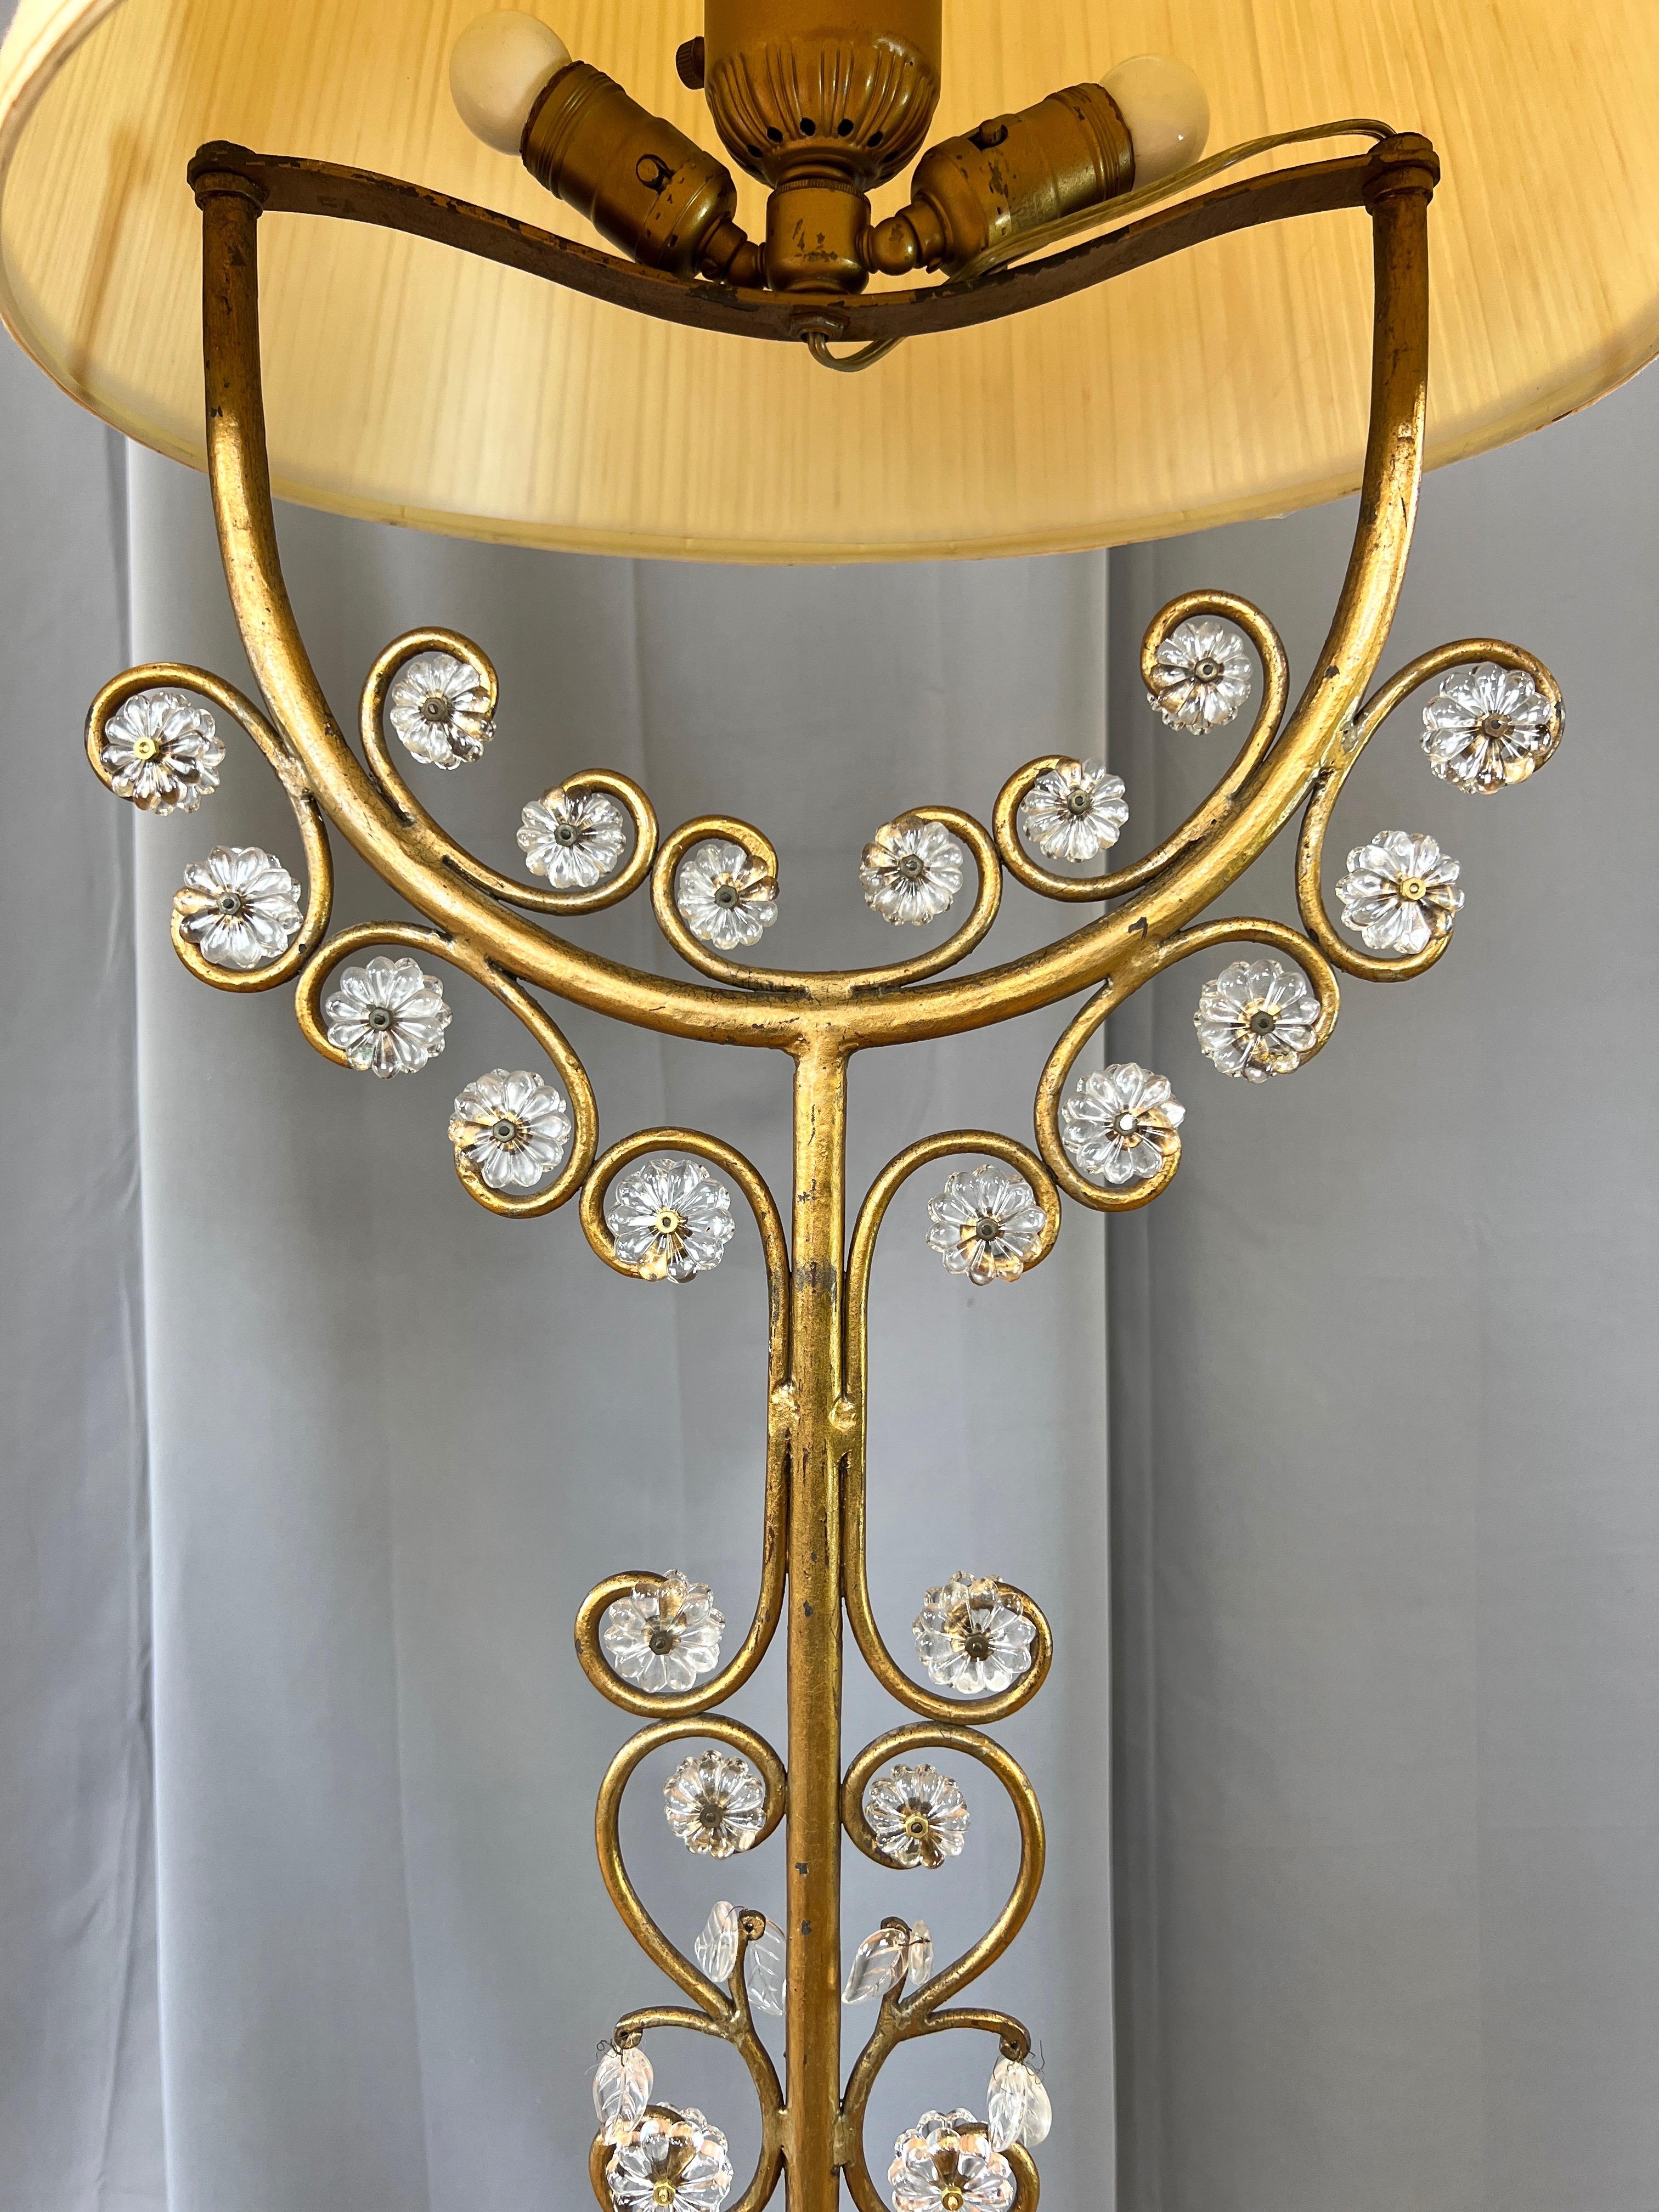 Pair of Italian Gilt Wrought Iron Floor Lamps with Glass Florets & Leaves, 1950s For Sale 3